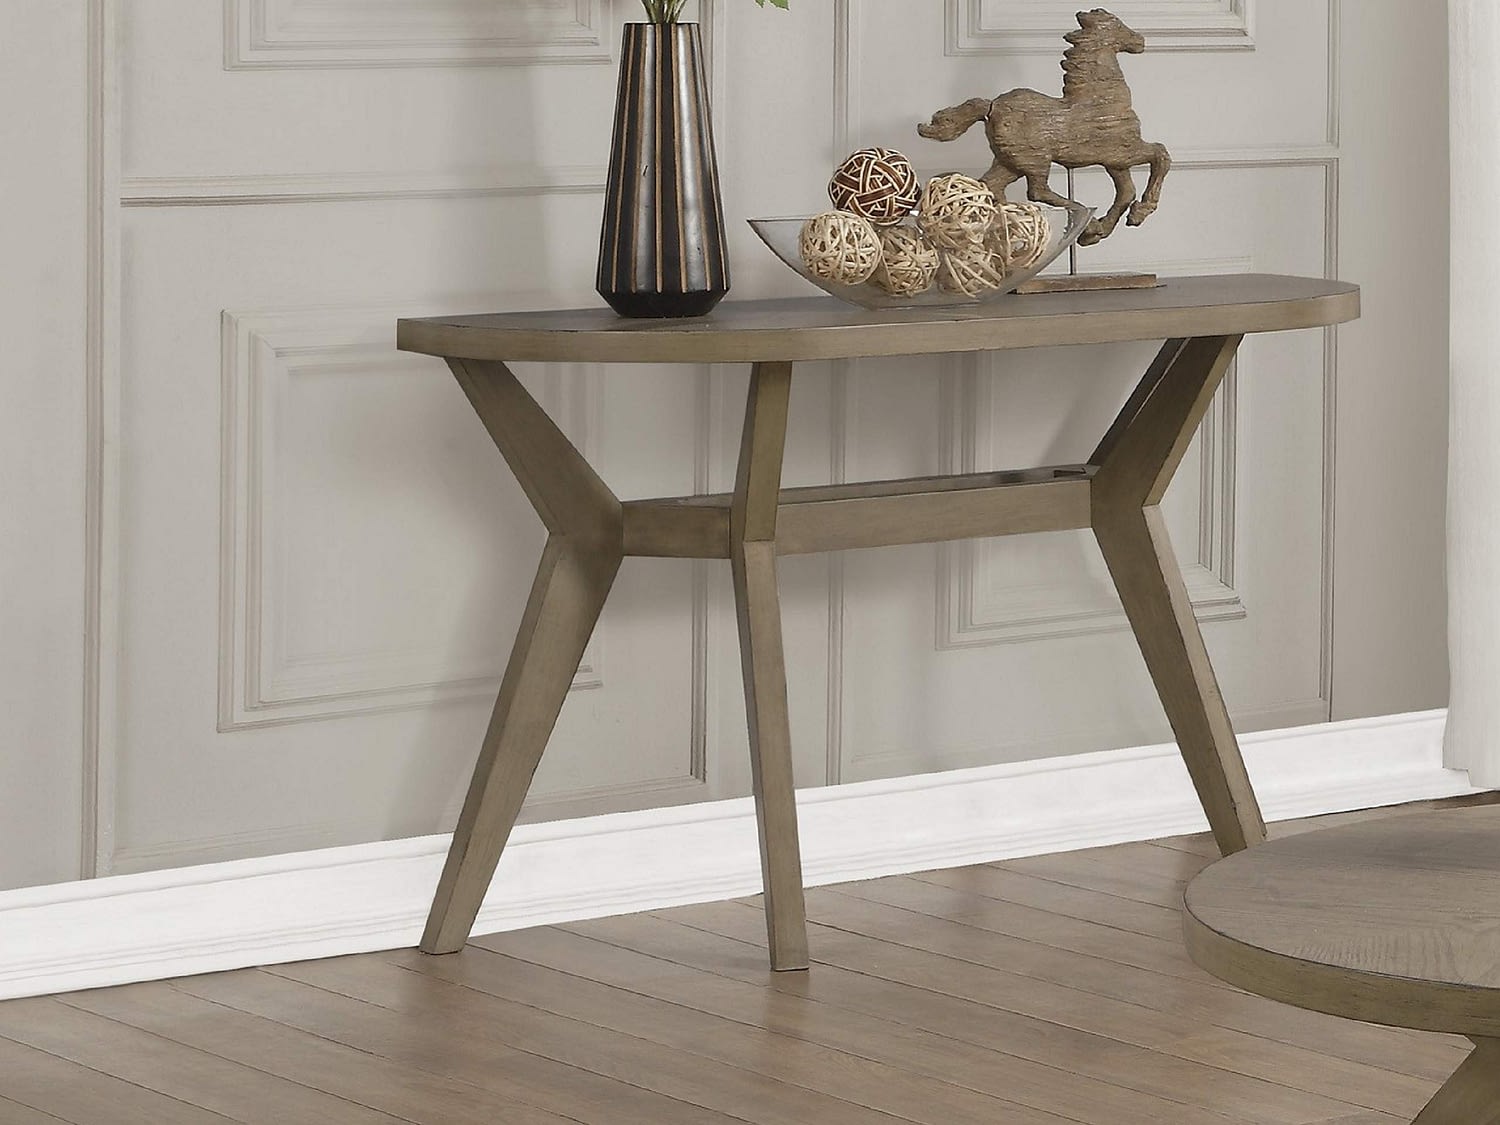 HOYAT Console Table